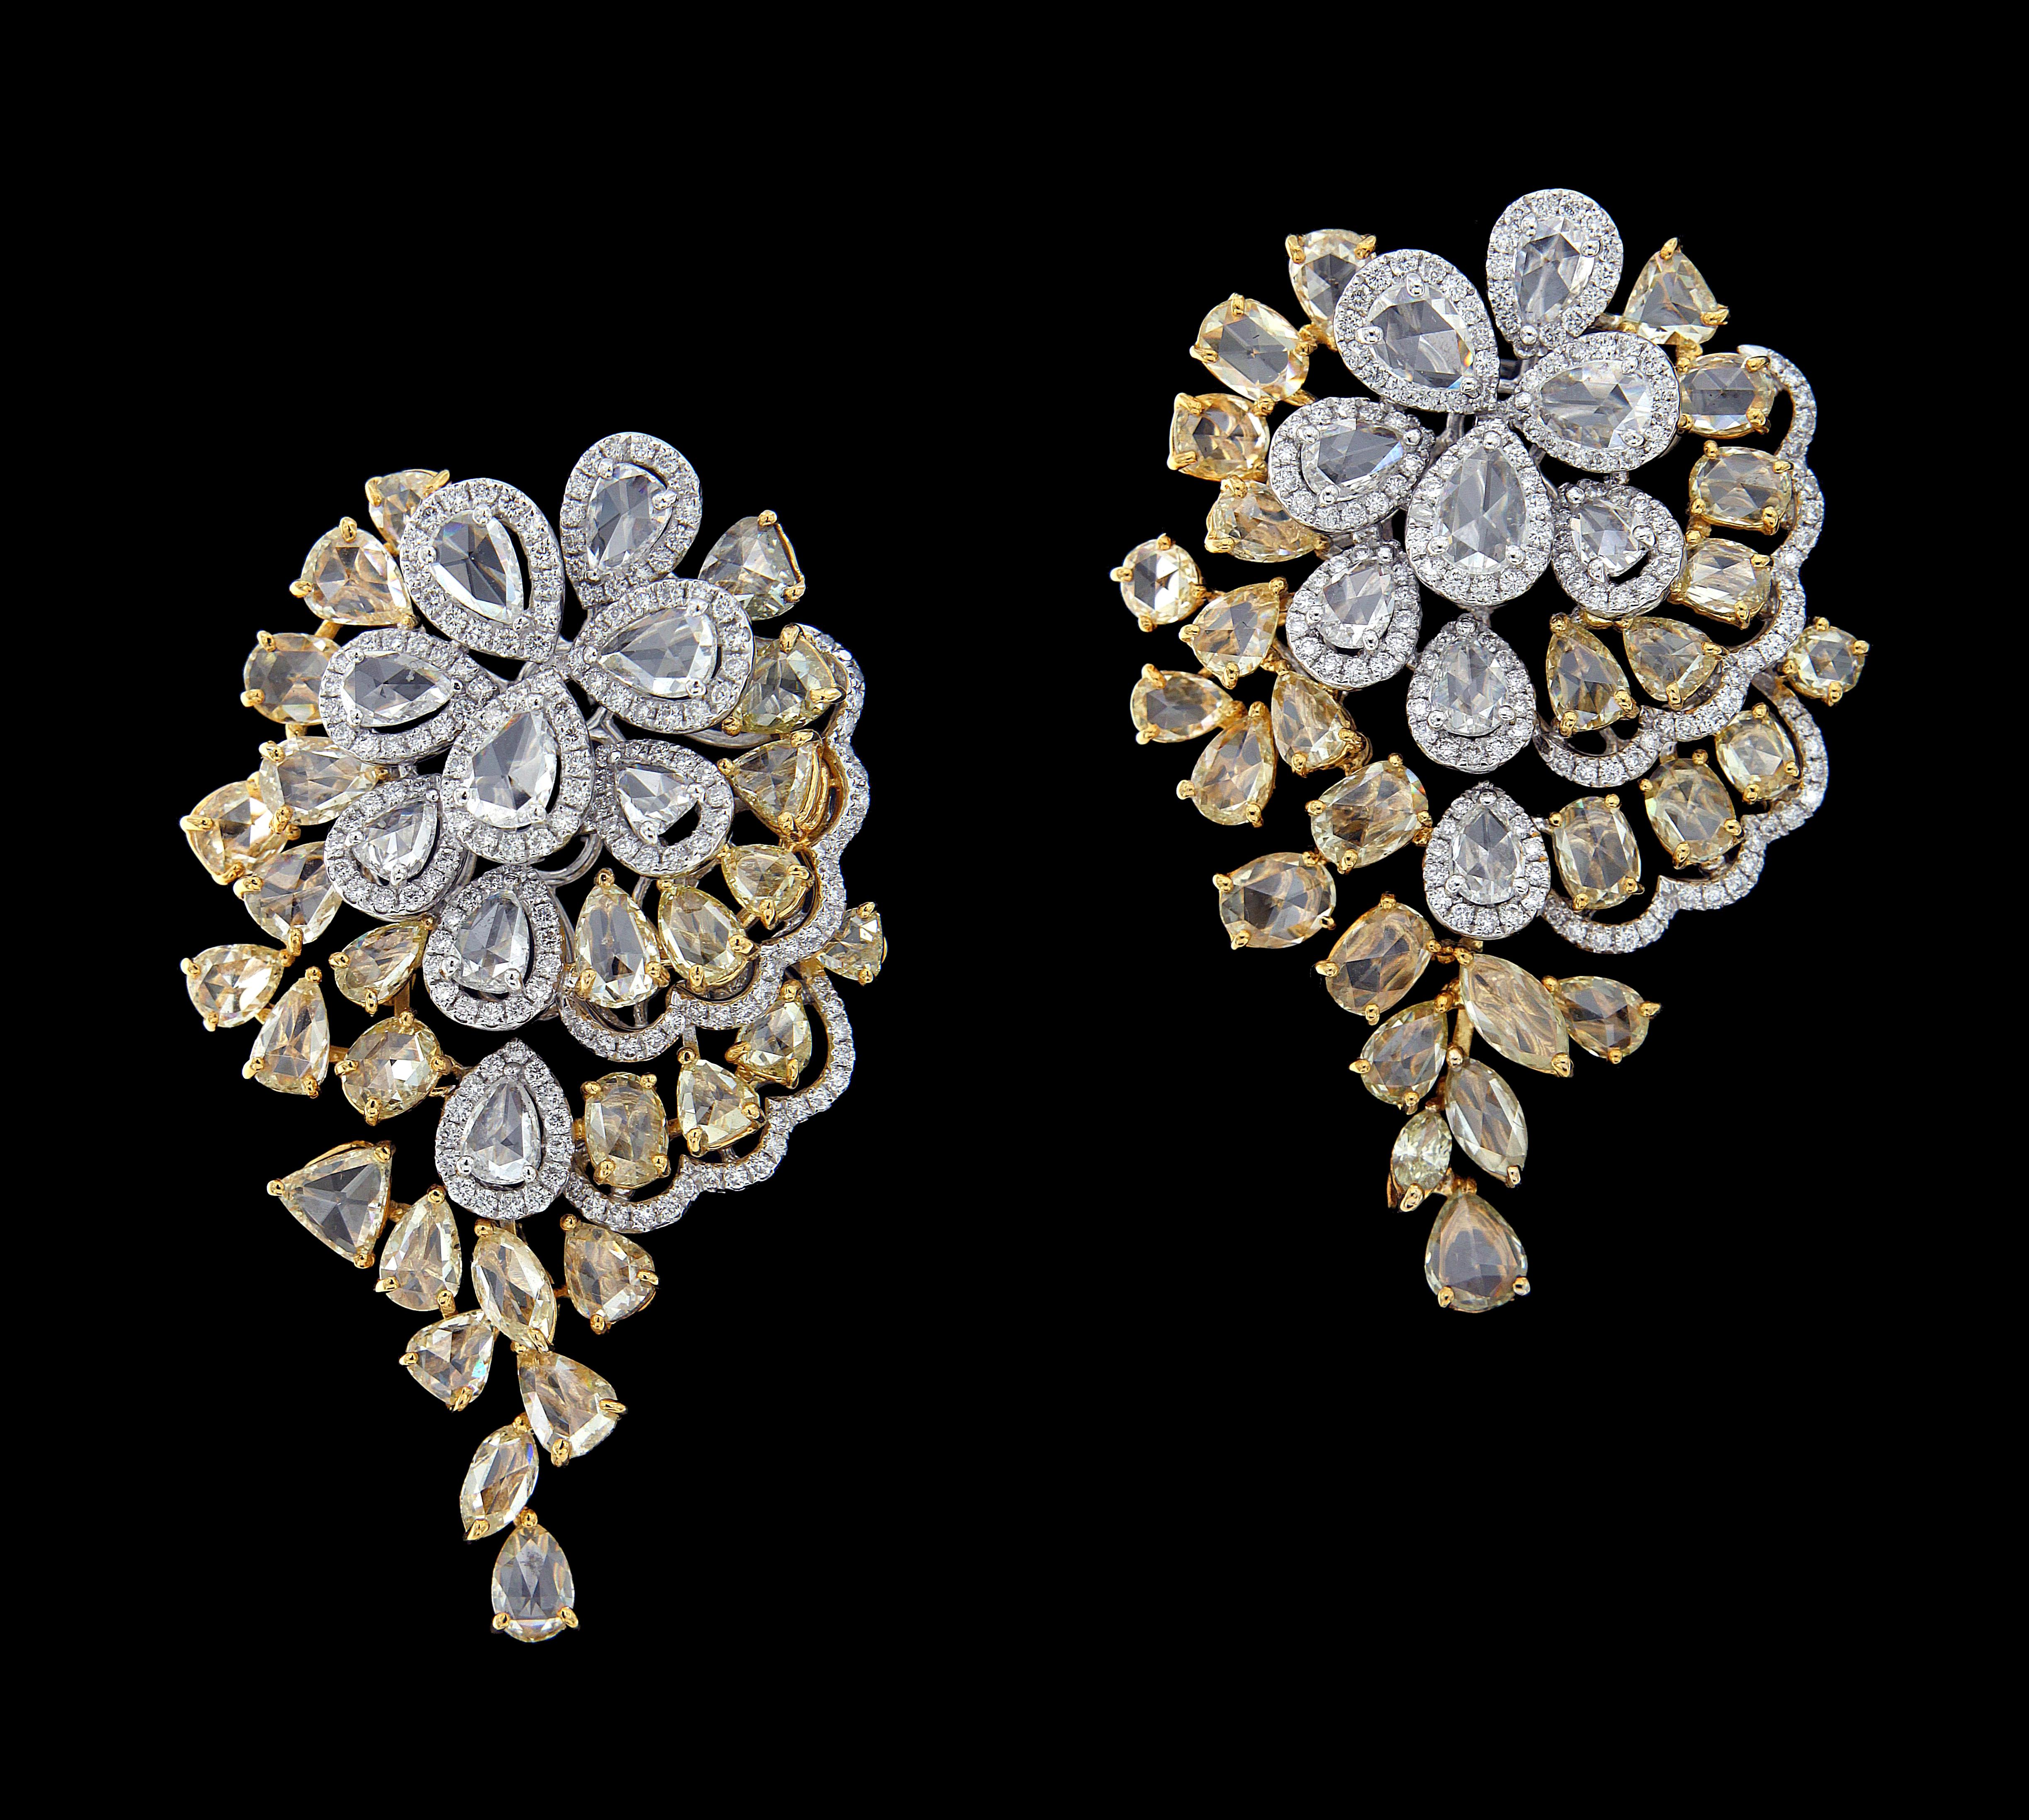 Grandiose 18 Karat White And Yellow Gold, And Diamond Earring.

Earrings:
Diamonds of approximately 15.797 carats mounted on 18 karat white yellow gold earring. The earring weighs approximately around 25.751 grams.

Please note: The charges